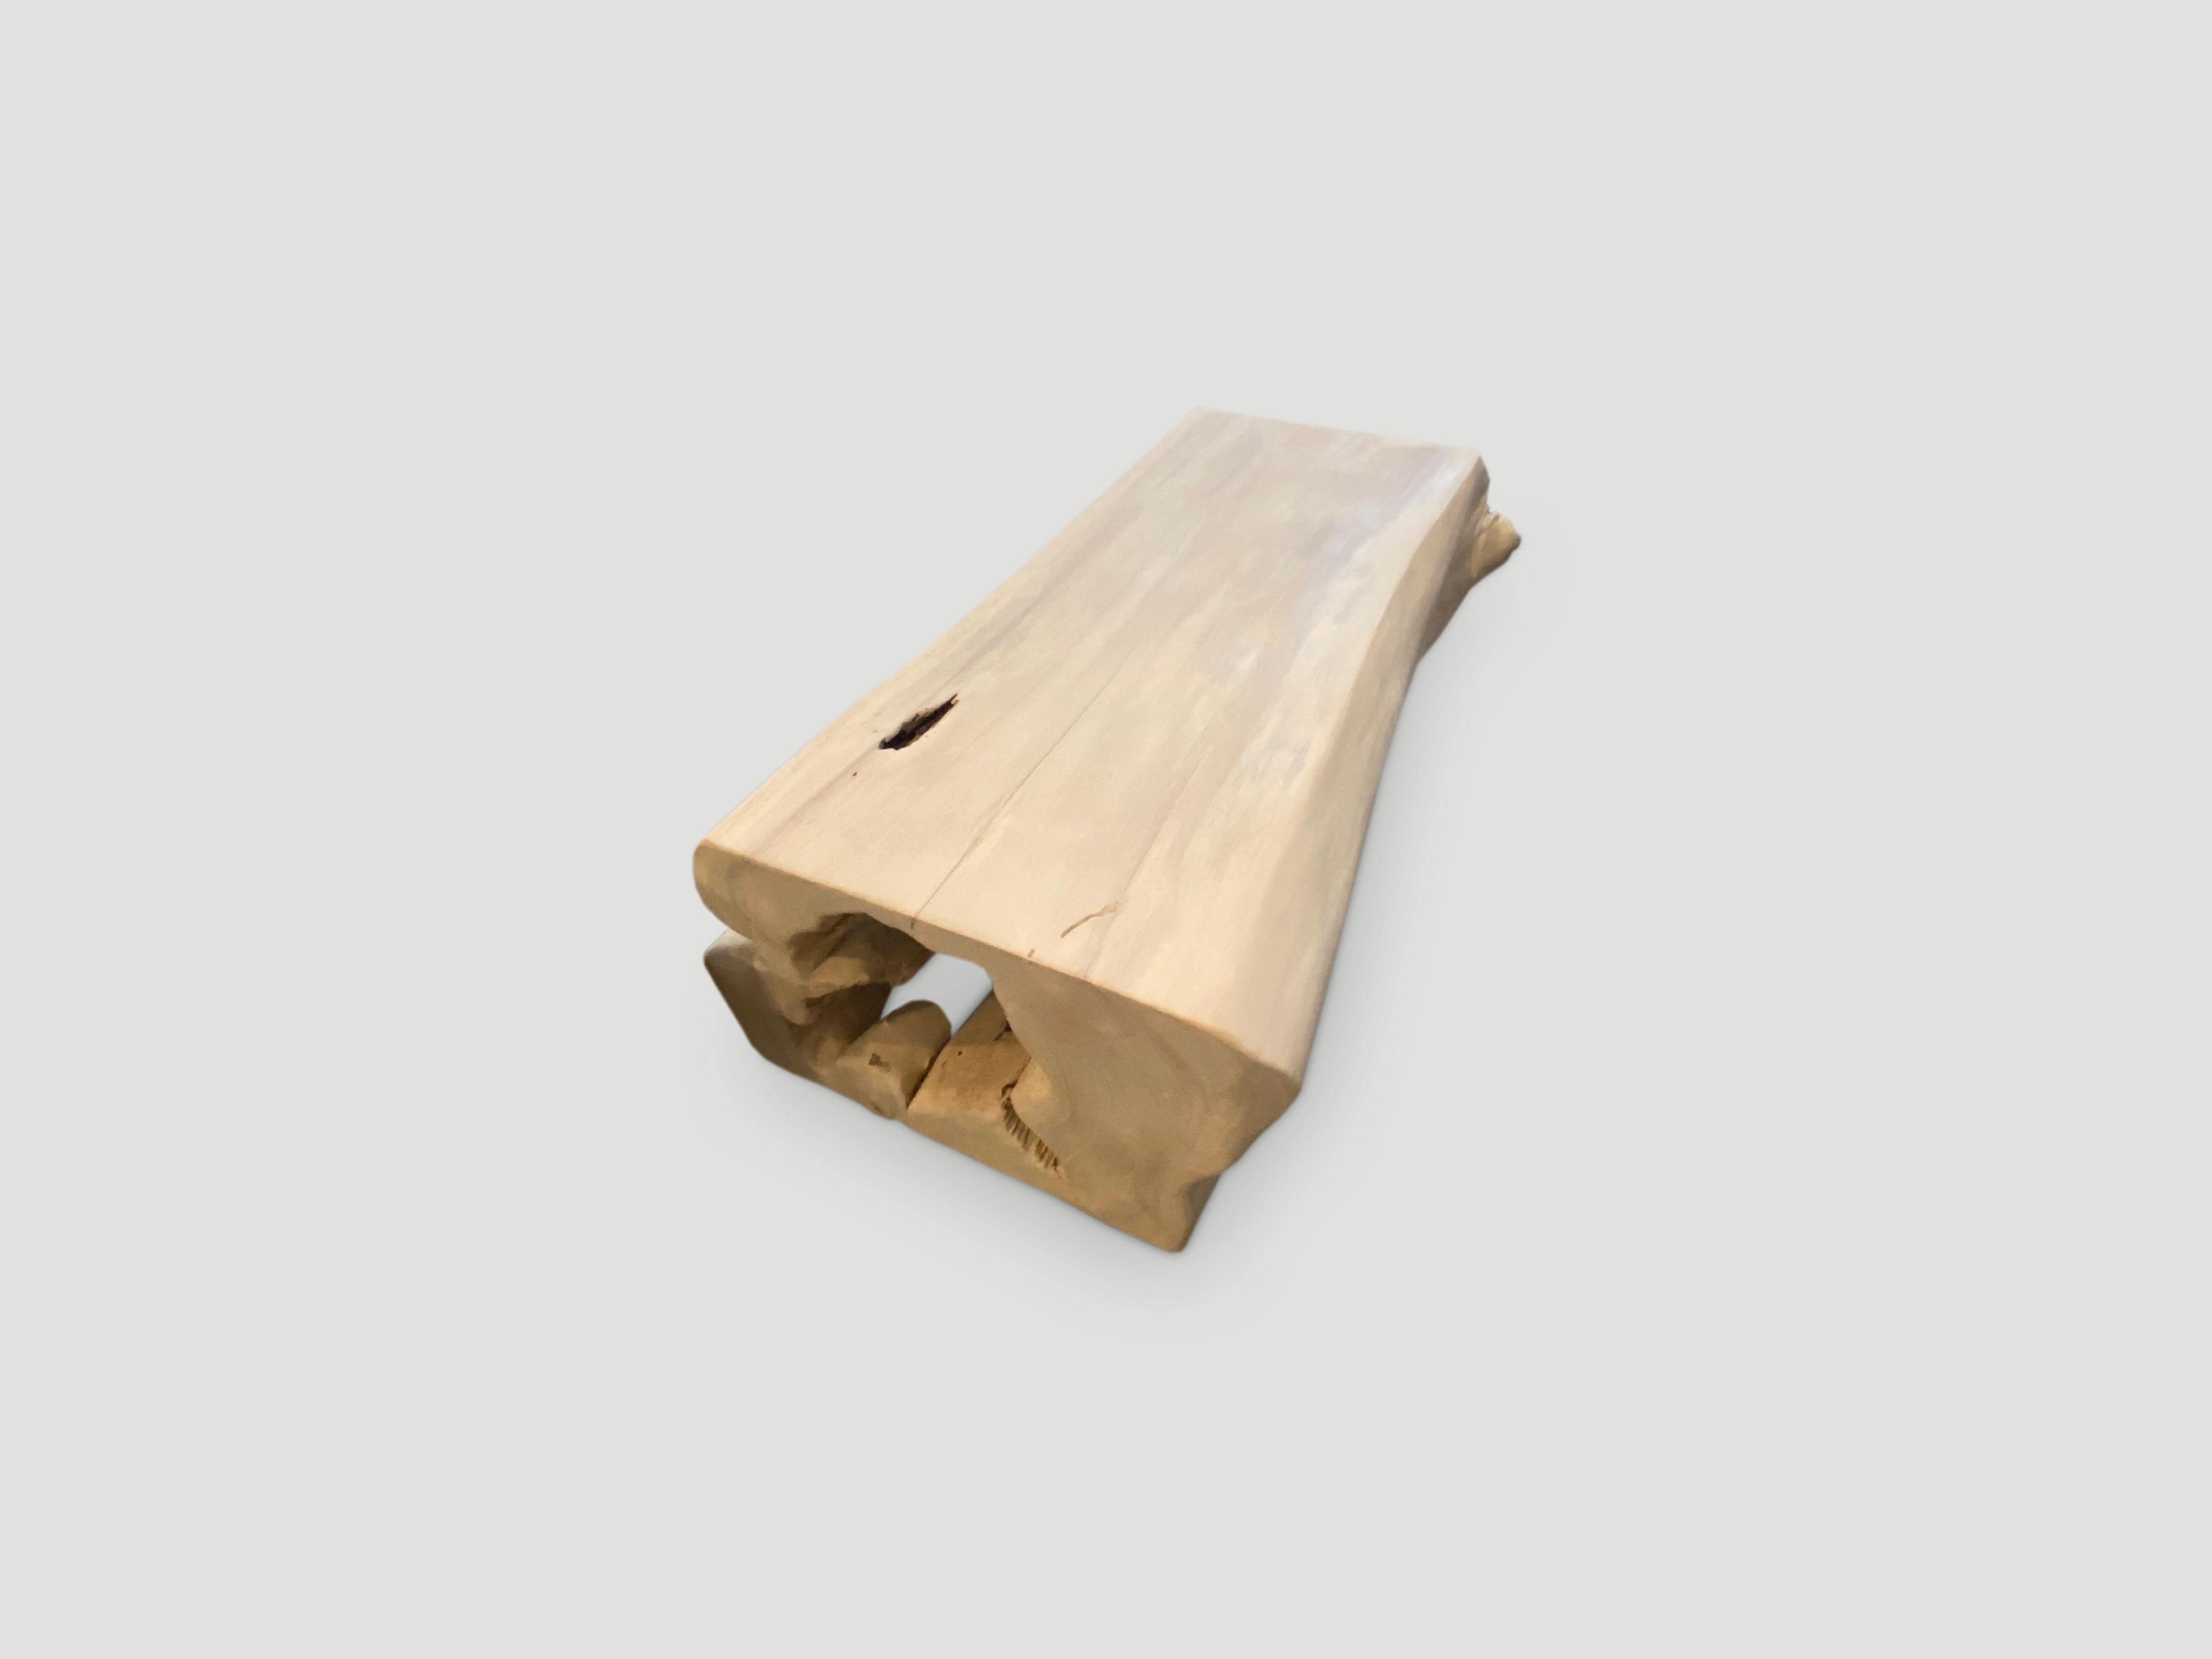 Contemporary Andrianna Shamaris St. Barts Reclaimed Teak Wood Coffee Table or Bench For Sale